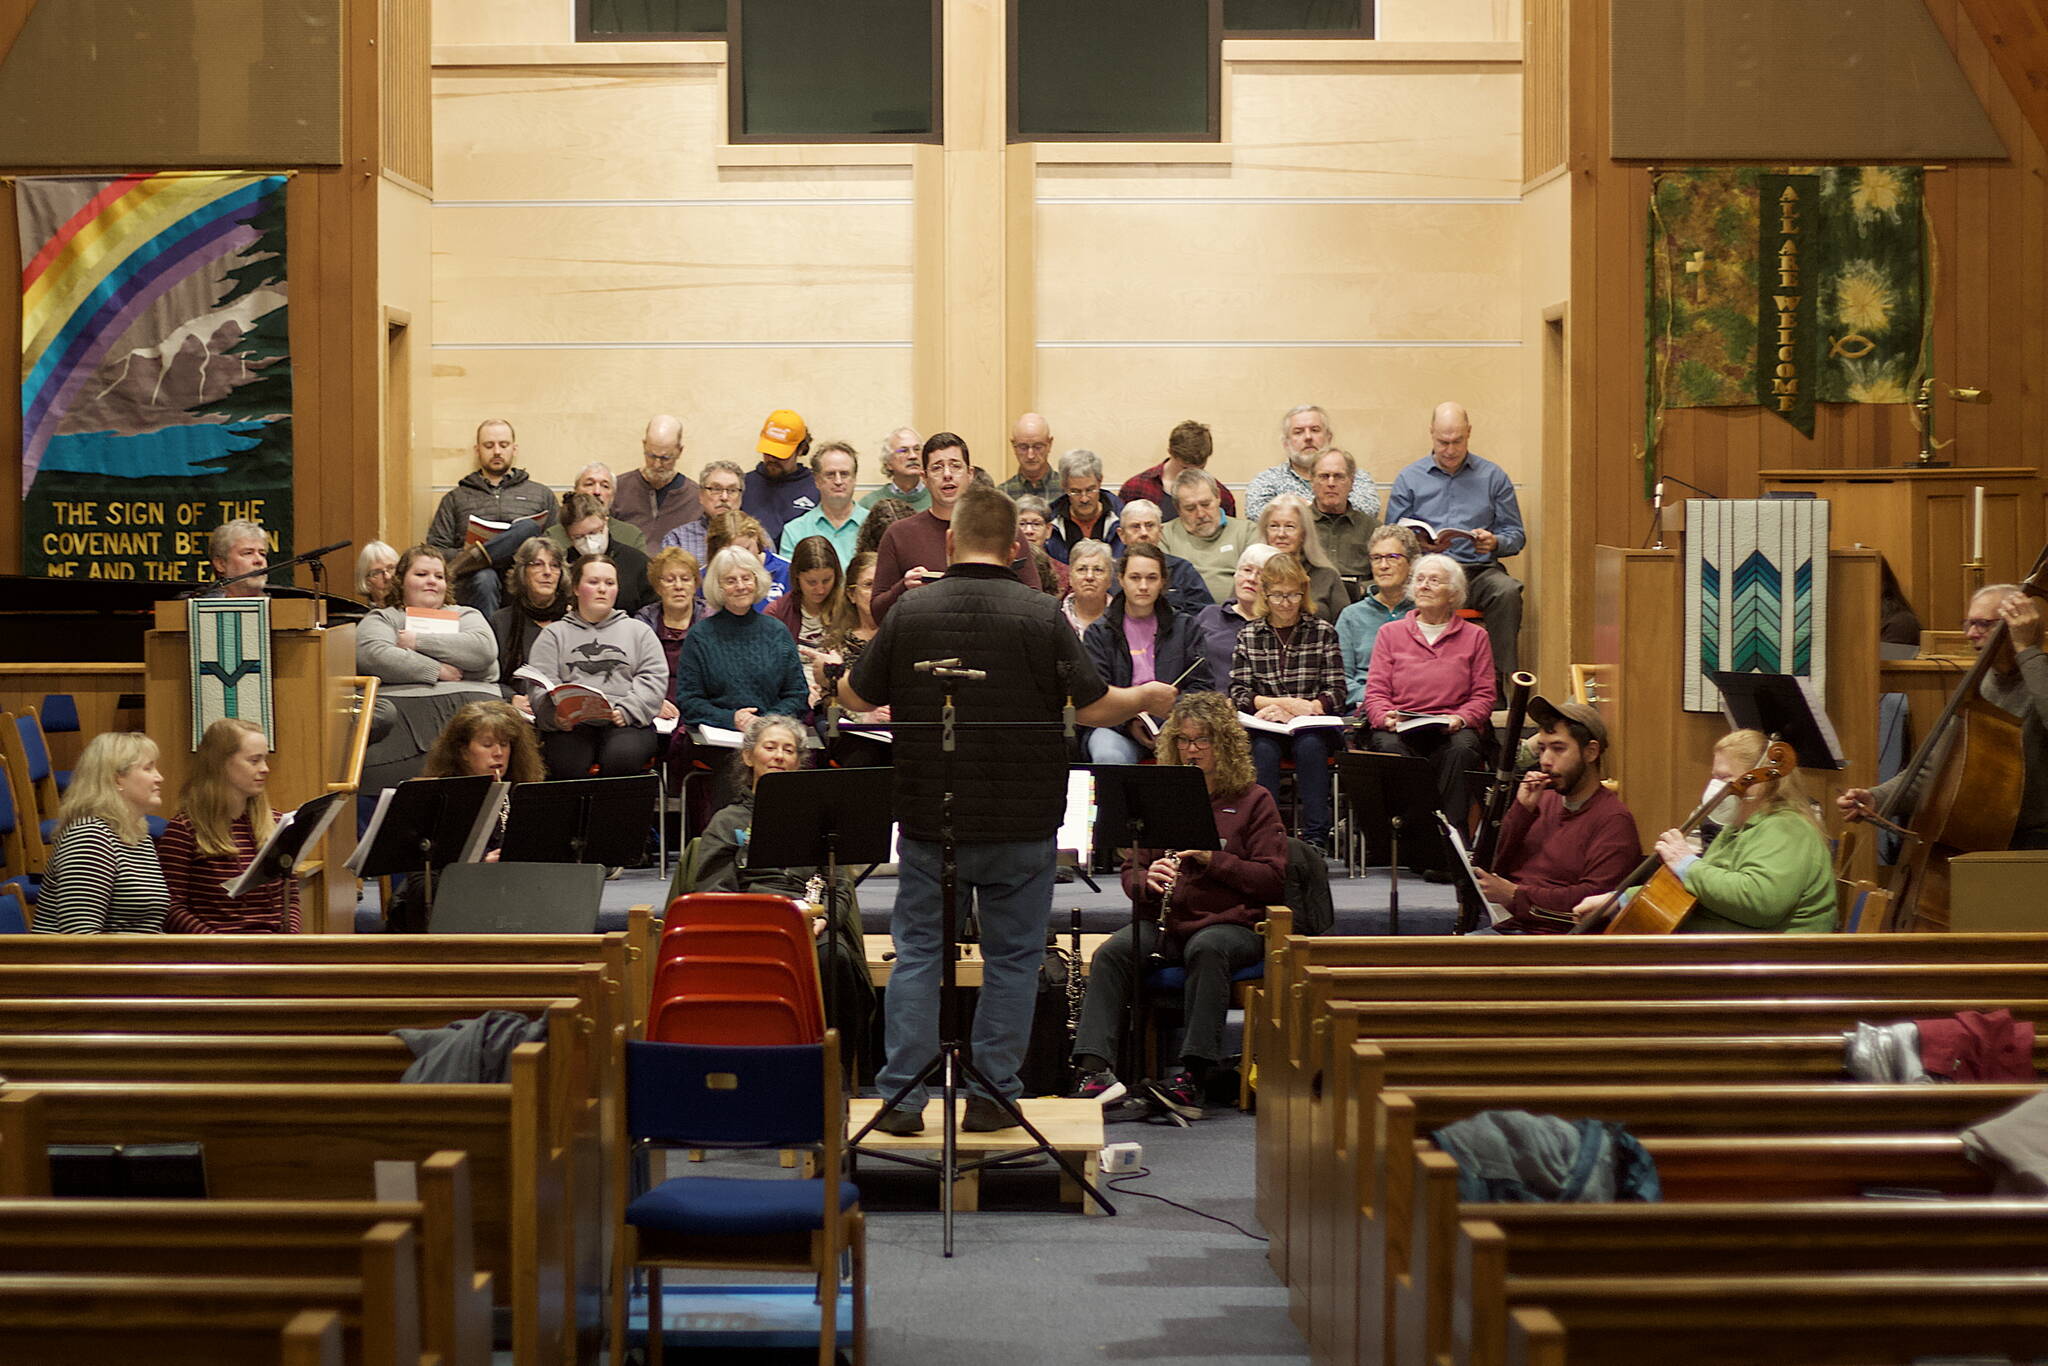 Chorus members and instrumentalists rehearse a portion of Handel’s “Messiah” together for the first time on Wednesday evening at Ḵunéix̱ Hídi Northern Light United Church in preparation for concerts Saturday and Sunday. (Mark Sabbatini / Juneau Empire)